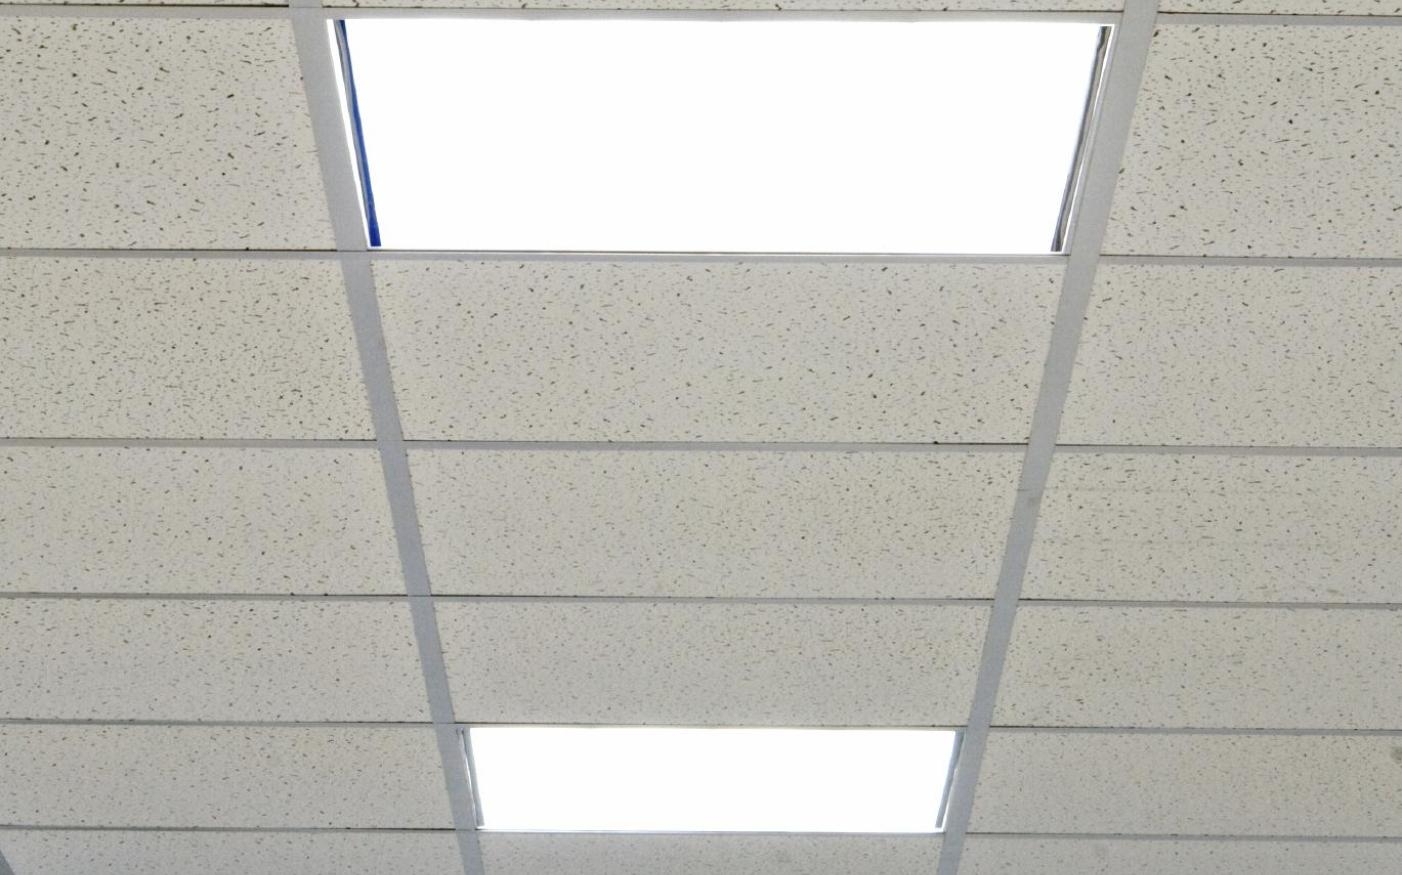 Office Ceiling Tiles Sizes Office Ceiling Tiles Sizes ceiling olympus digital camera office ceiling tiles ideal 1402 X 875